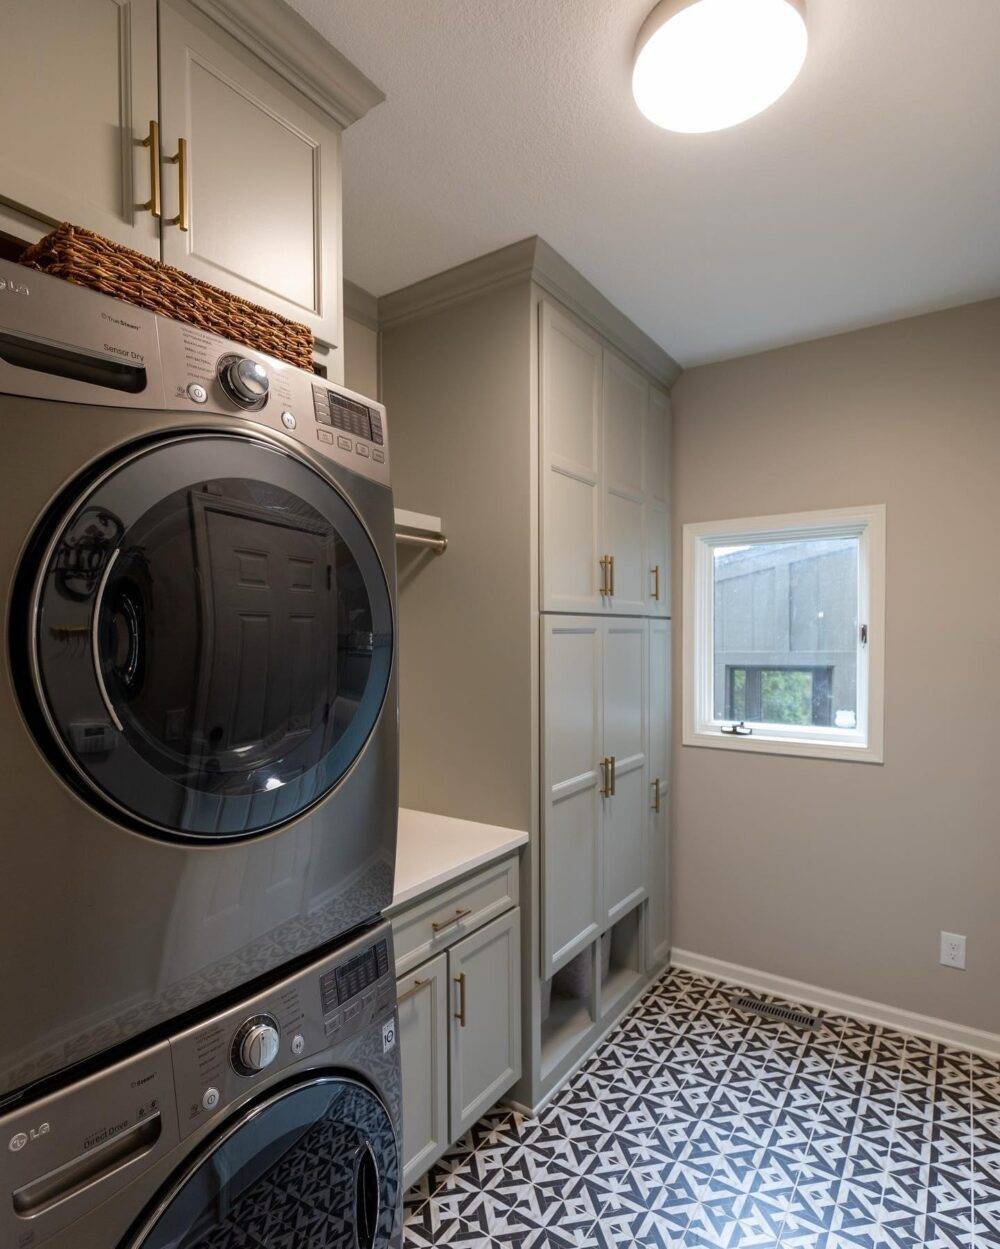 This laundry room features a black and white marble patterned tile floor.